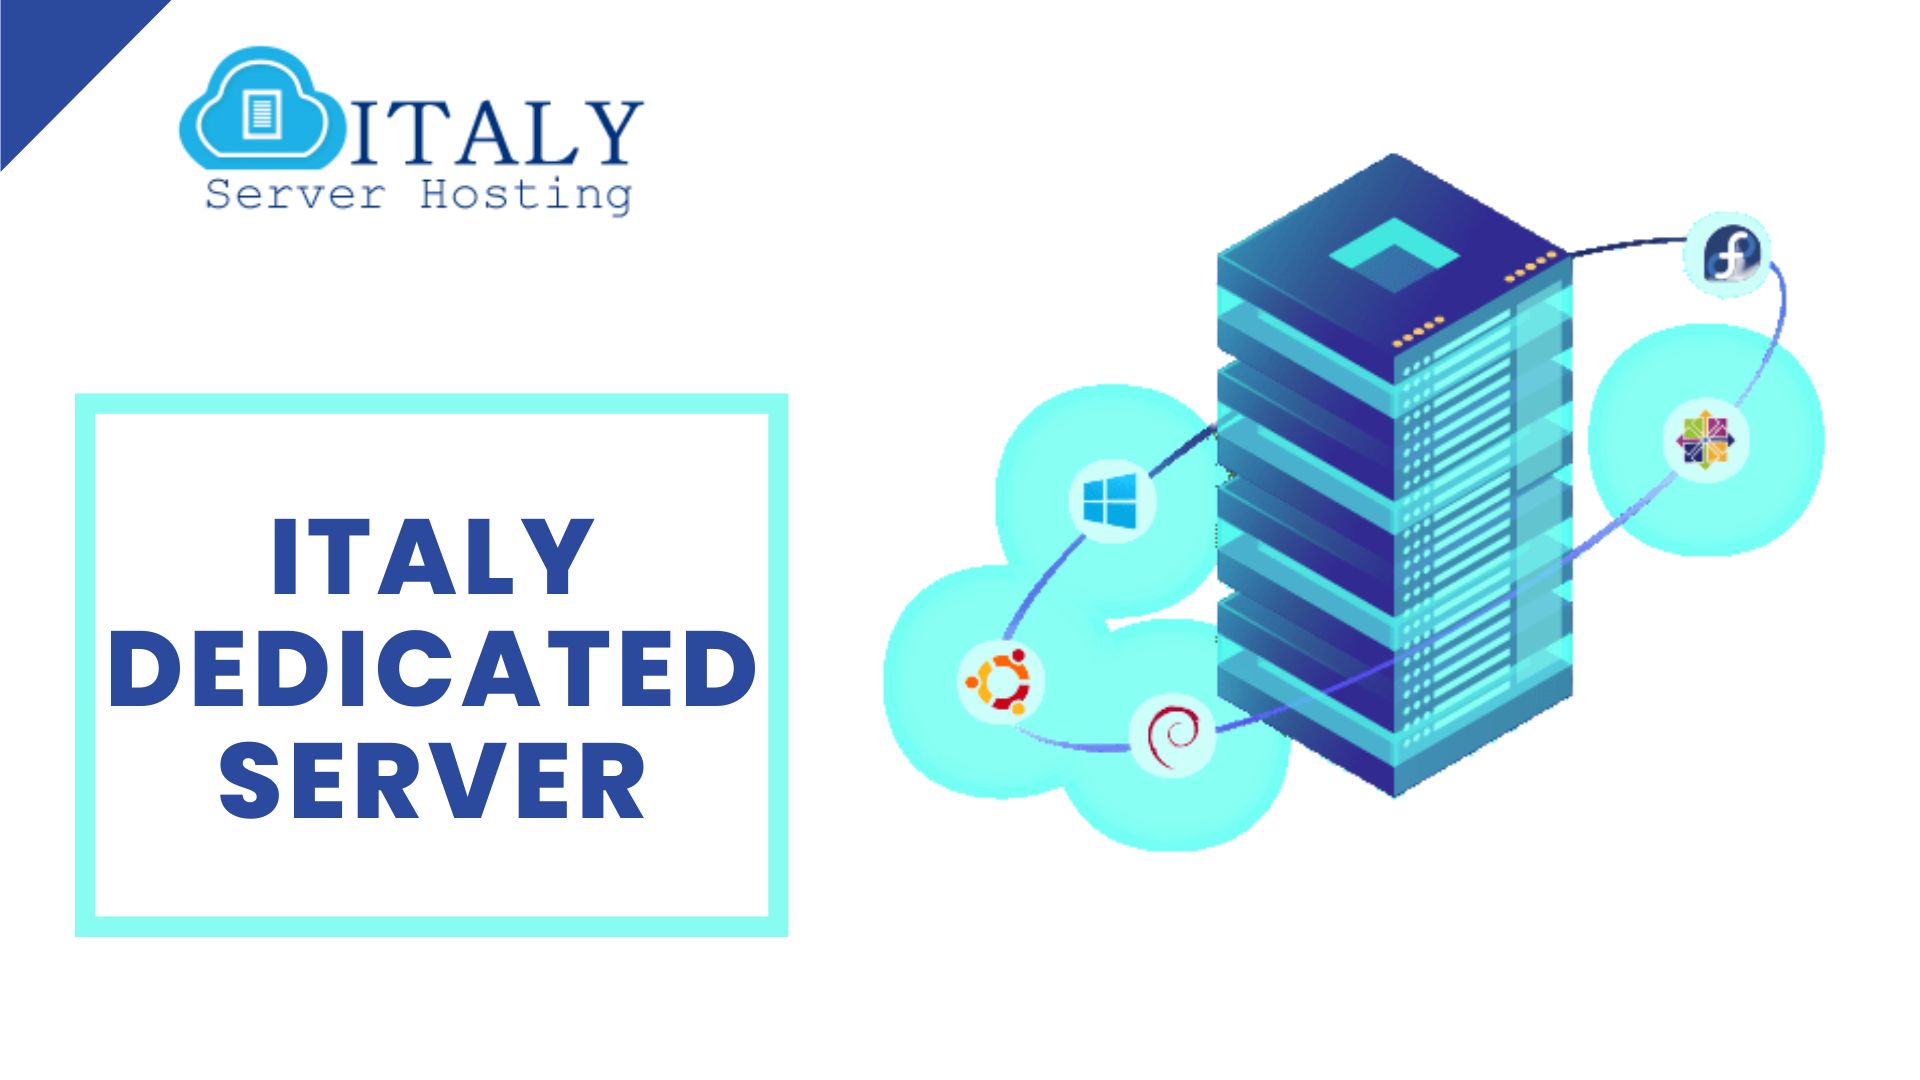 Start Your Business Potential with an Italy Dedicated Server by Italy Server Hosting